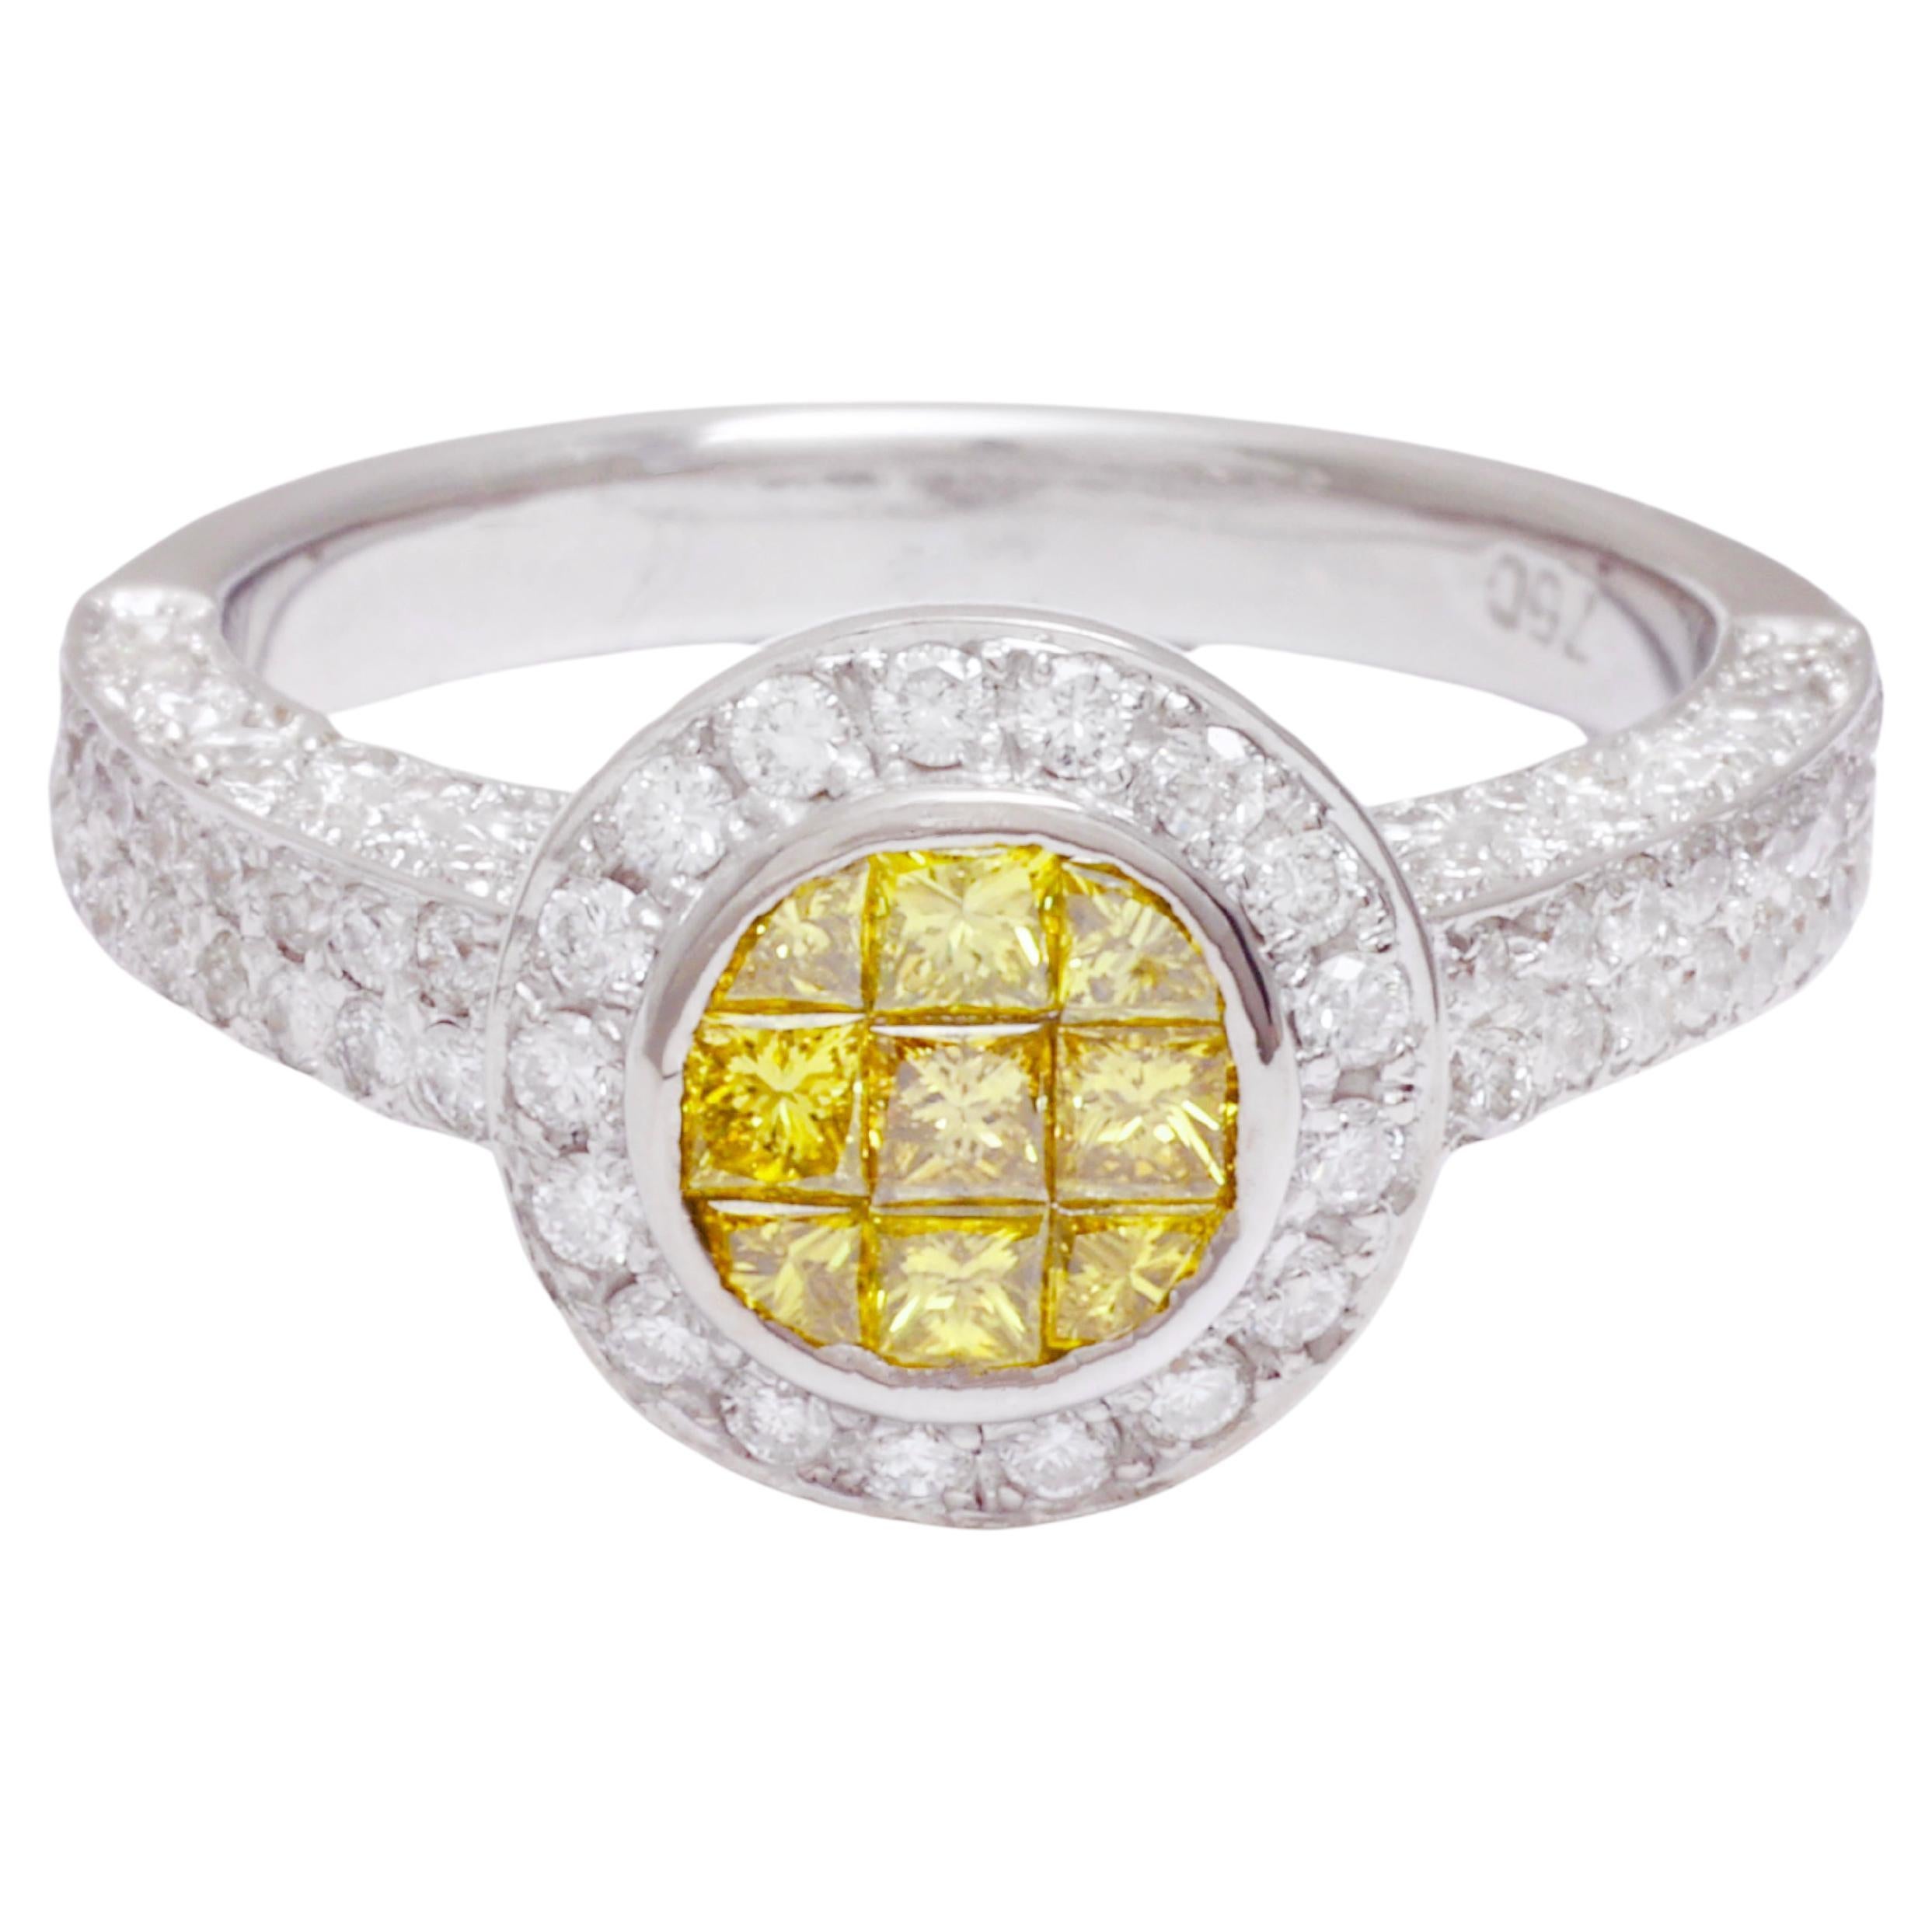 Beautiful 18 kt. White Gold Ring with 1.7 ct. Invisible Set Intense Fancy Yellow and White Diamonds

Diamonds: White diamonds together 1.24 ct.
Yellow diamonds: Invisible Set Princess cut Intense yellow diamonds together 0.45 ct.

Material: 18 kt.